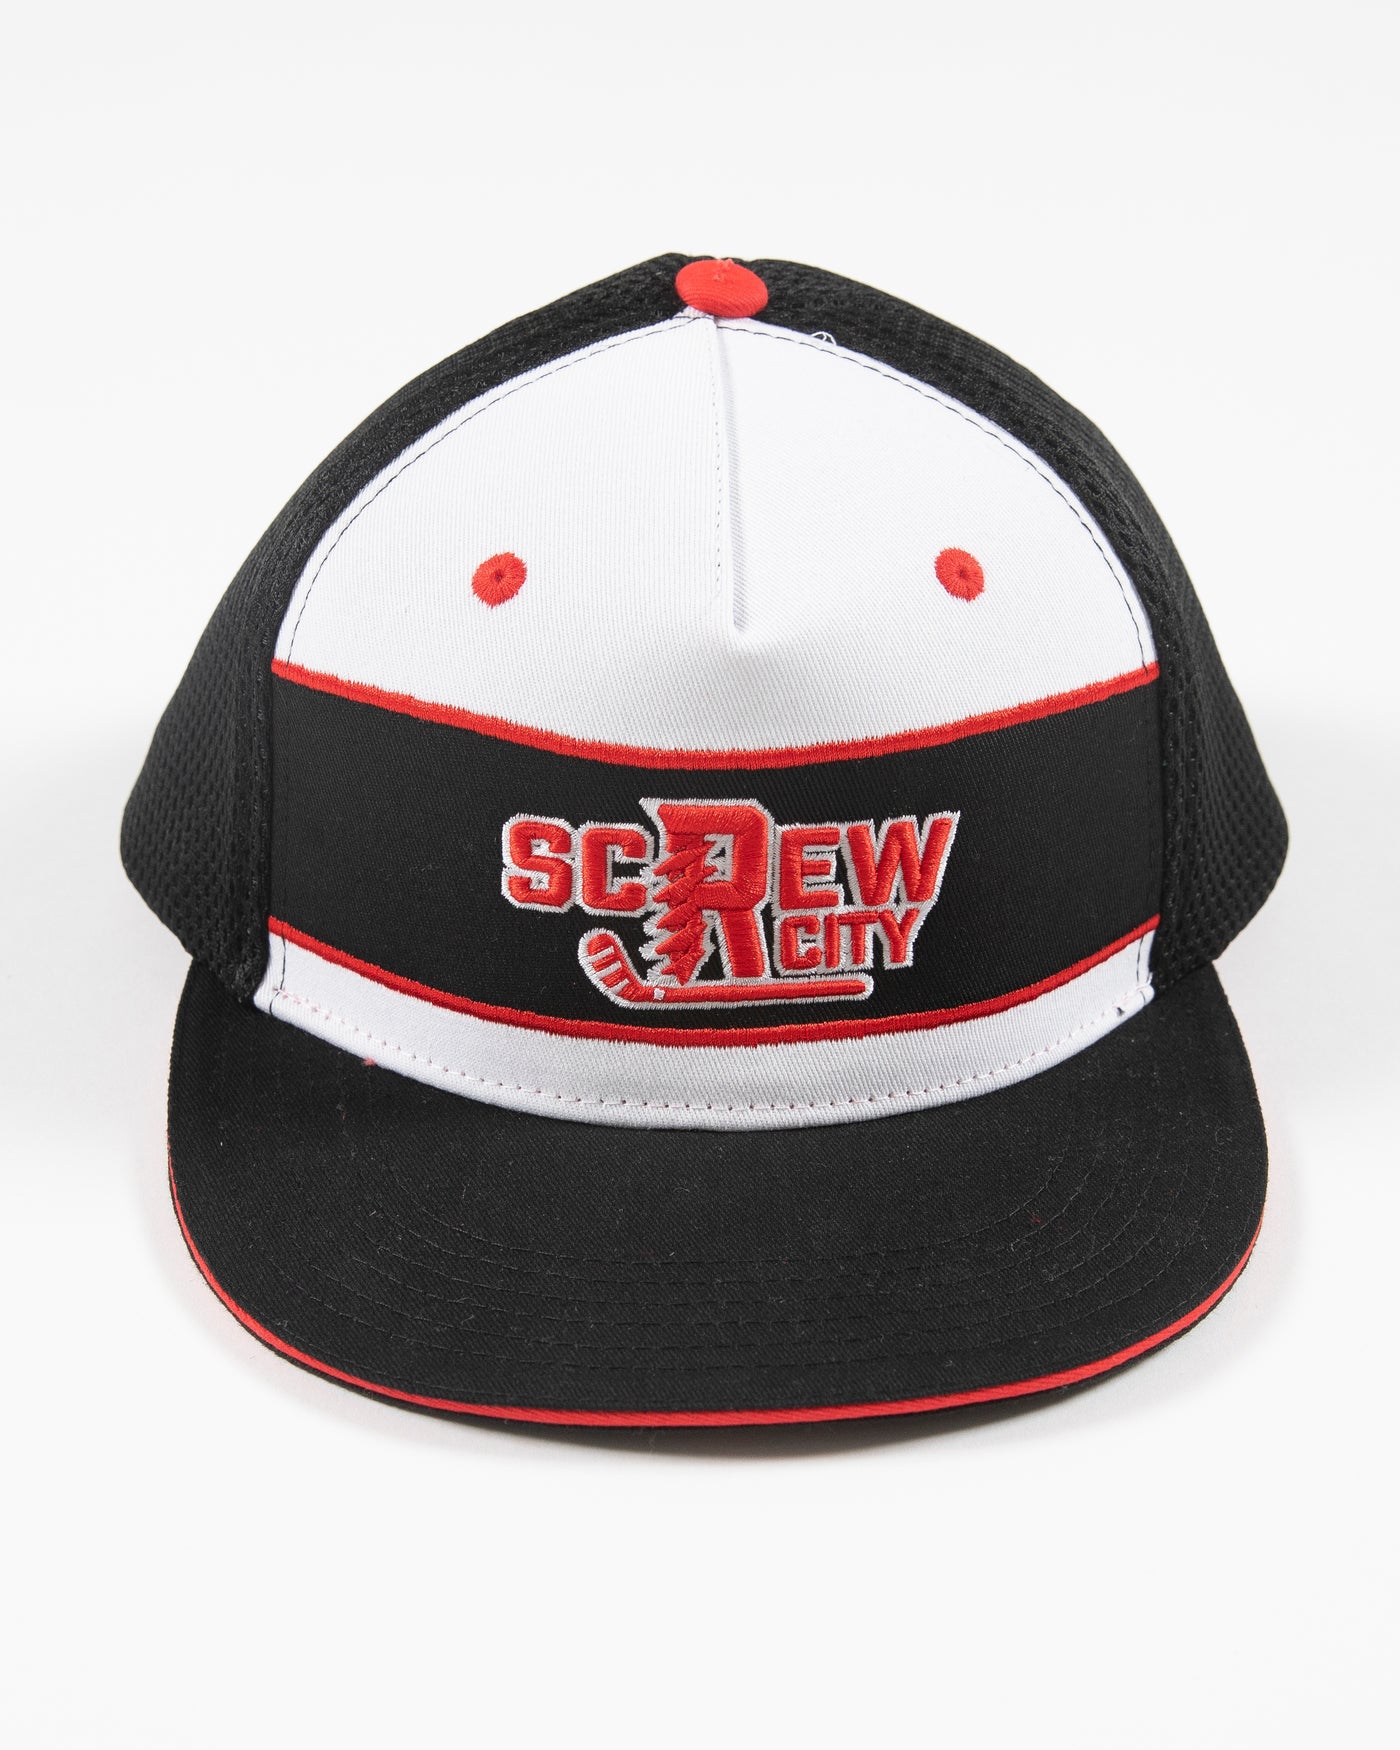 black, white and red adjustable cap with Screw City embroidered decal on front - front lay flat